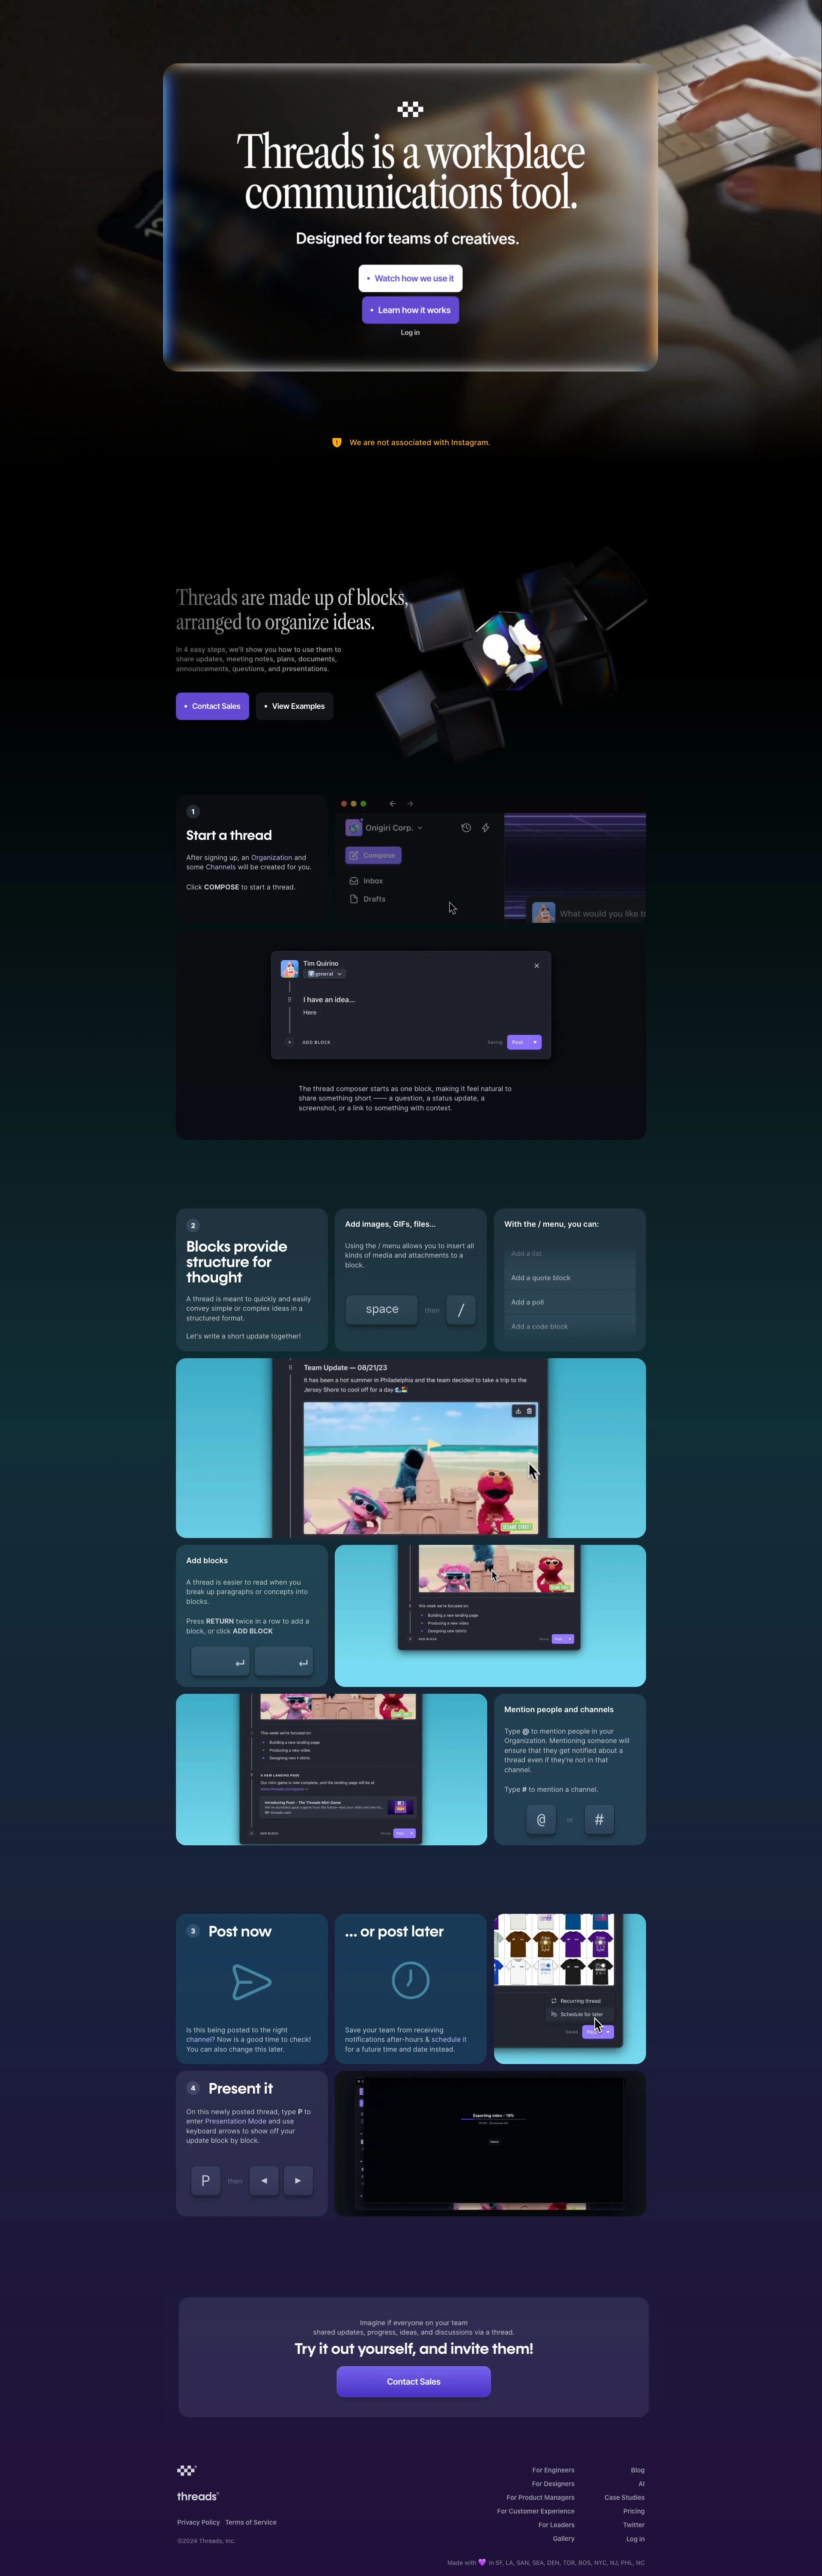 Threads Landing Page Example: We've built an all-in-one communication platform designed for makers. With Threads, avoid constant interruptions, the pain of keeping up / catching up, and encourage progress over motion as your company scales.